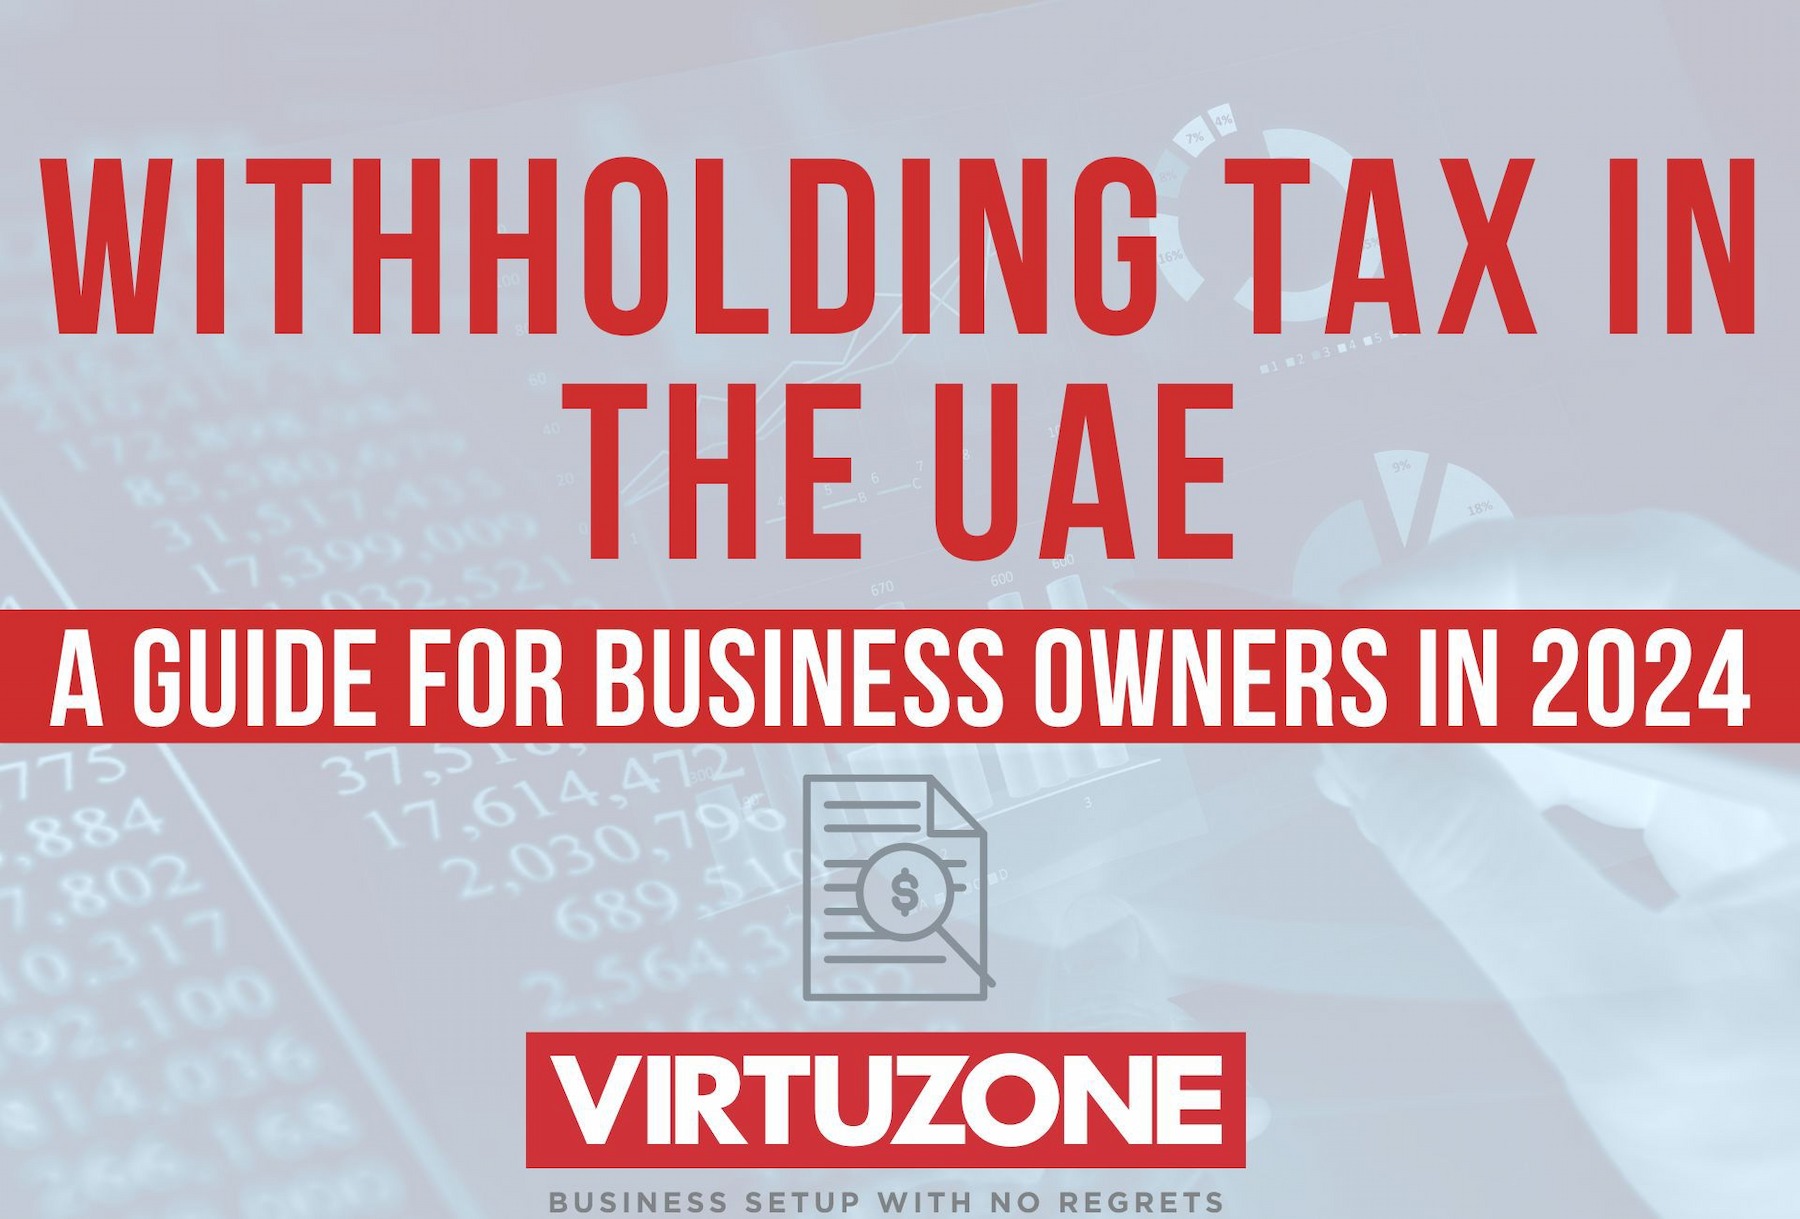 An infographic with the text showing the title of the article 'Withholding Tax in the UAE'.